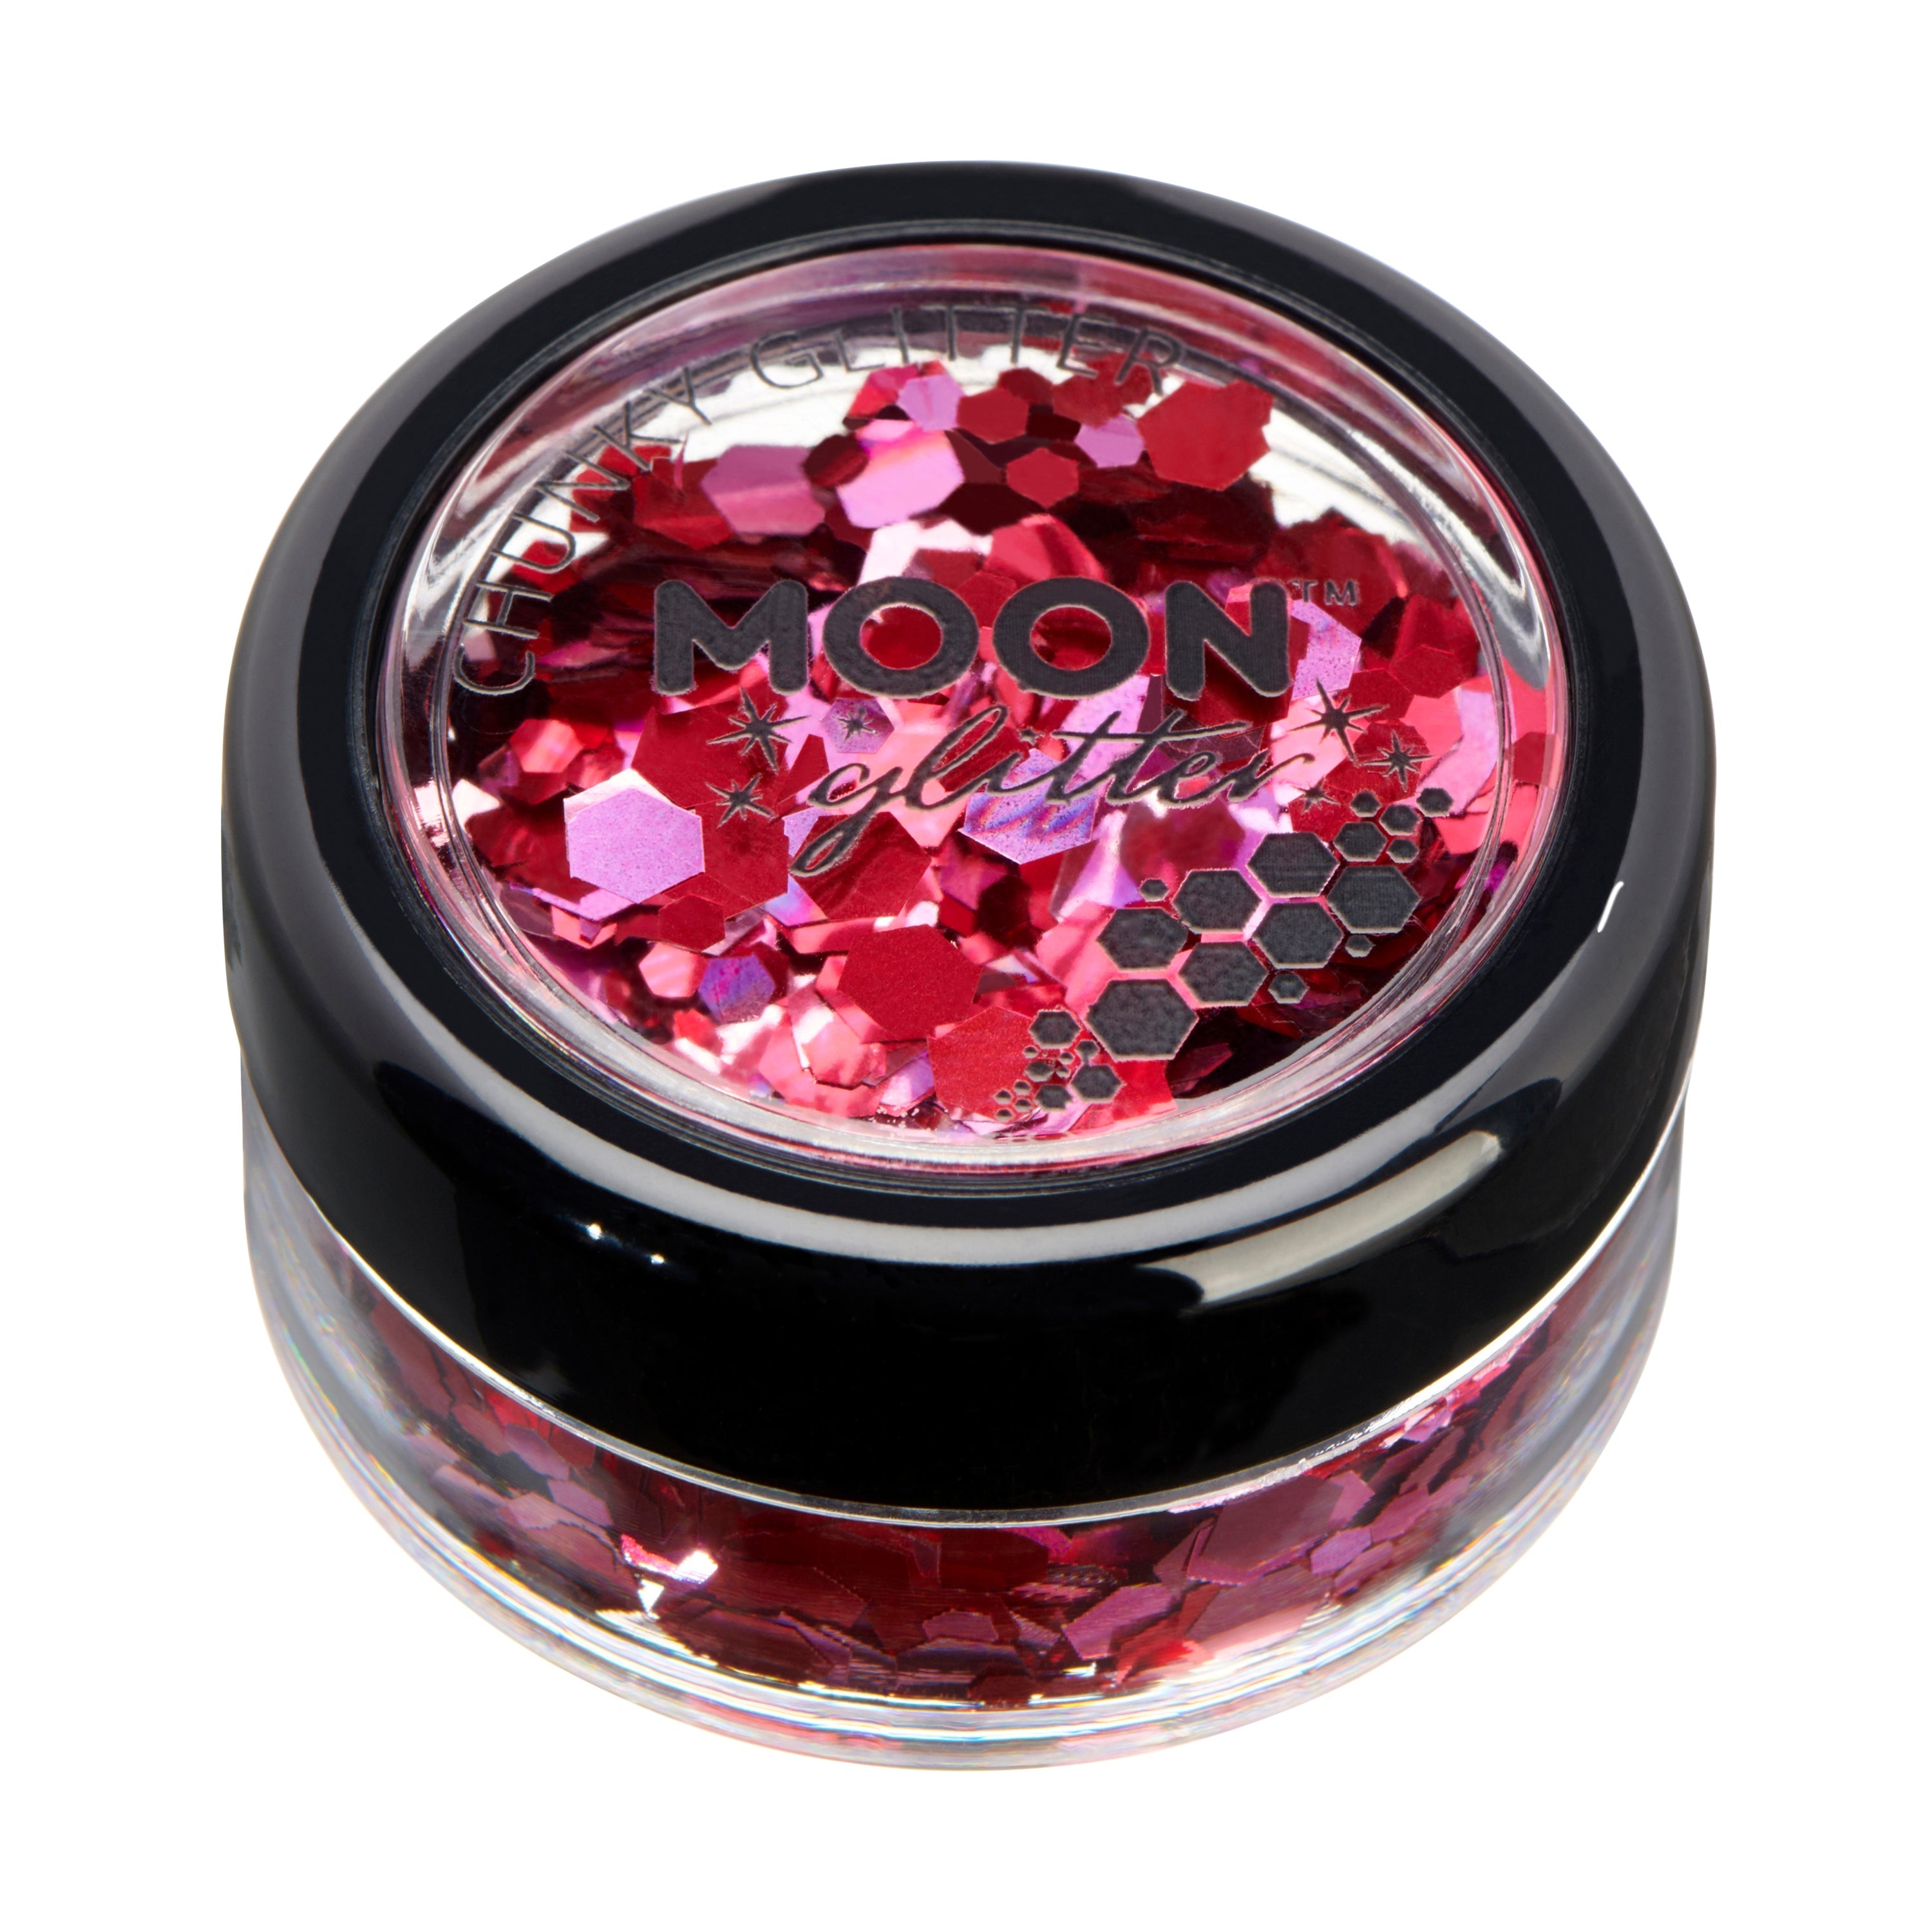 Valentines - Mystic Chunky Face & Body Glitter, 3g. Cosmetically certified, FDA & Health Canada compliant, cruelty free and vegan.